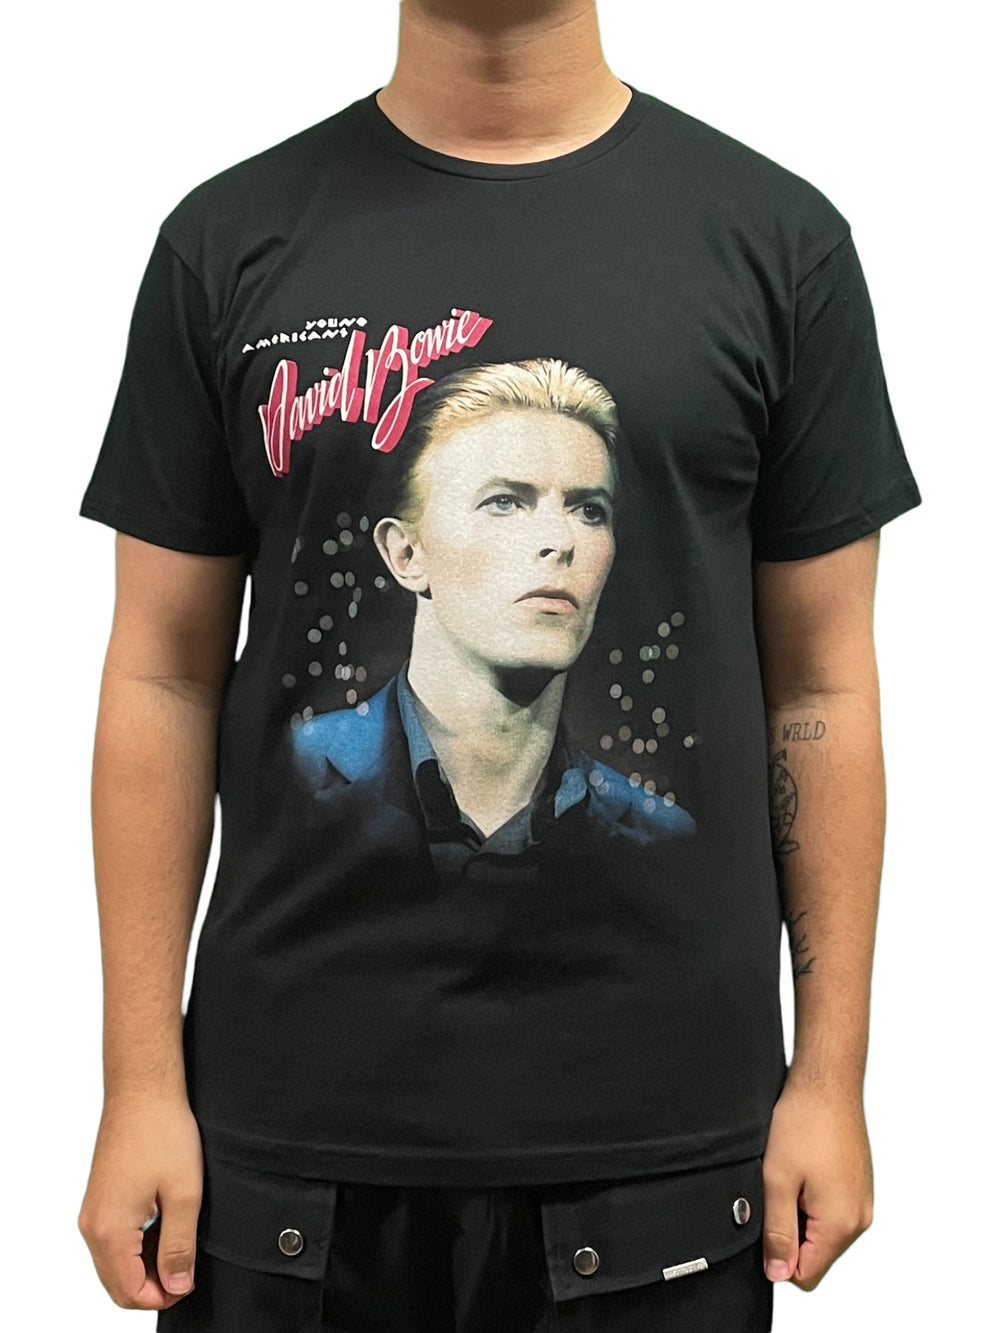 David Bowie - Young Americans Back Printed Official Unisex T Shirt Various Sizes 75 Range